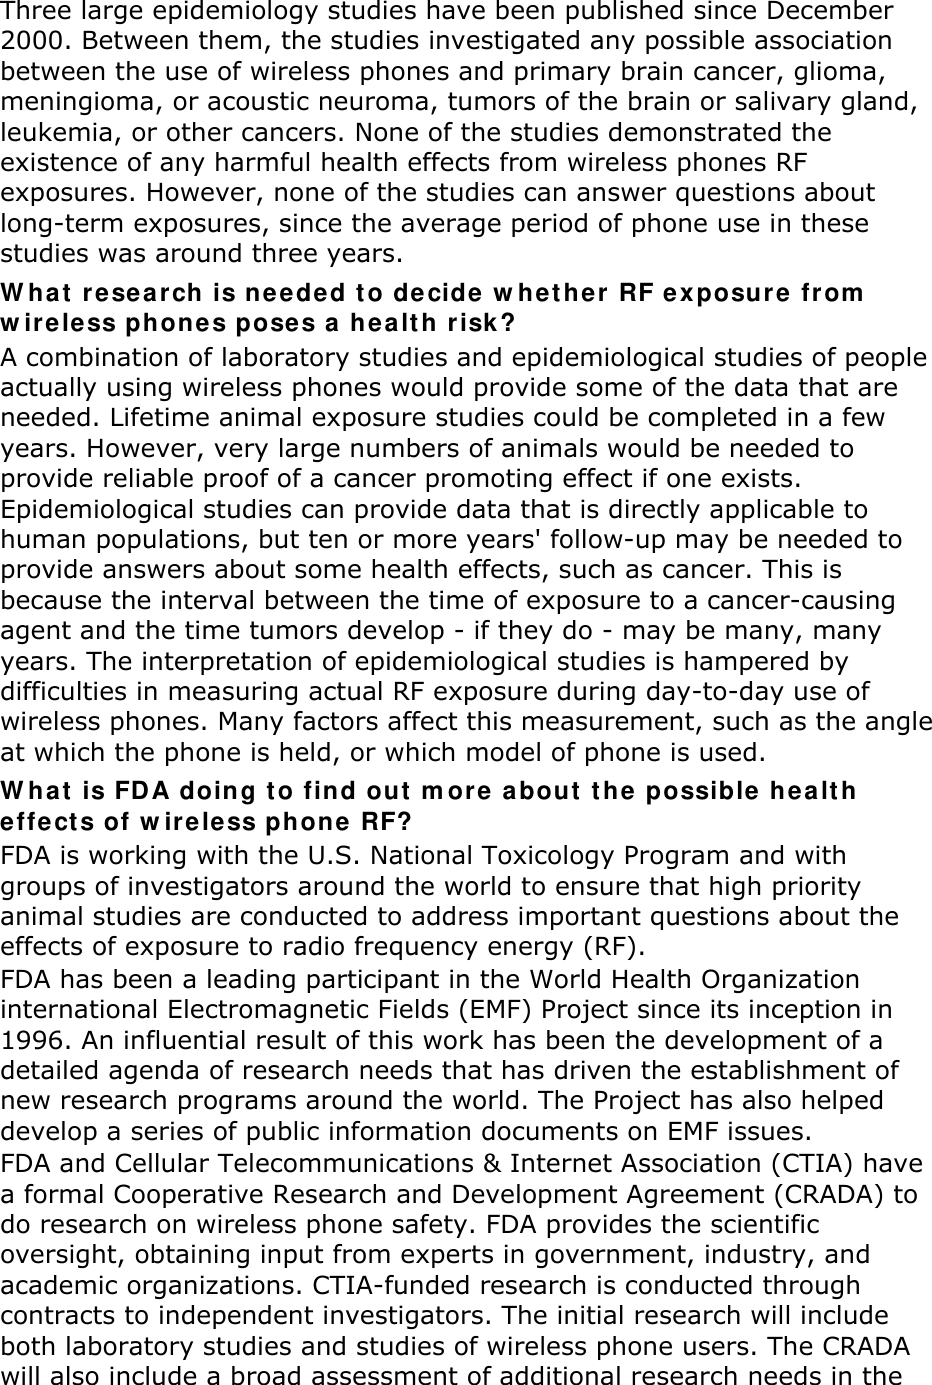 Three large epidemiology studies have been published since December 2000. Between them, the studies investigated any possible association between the use of wireless phones and primary brain cancer, glioma, meningioma, or acoustic neuroma, tumors of the brain or salivary gland, leukemia, or other cancers. None of the studies demonstrated the existence of any harmful health effects from wireless phones RF exposures. However, none of the studies can answer questions about long-term exposures, since the average period of phone use in these studies was around three years. W ha t  r e sea rch is ne e ded t o decide w het he r  RF exposure from  w ir e less phon e s pose s a healt h risk? A combination of laboratory studies and epidemiological studies of people actually using wireless phones would provide some of the data that are needed. Lifetime animal exposure studies could be completed in a few years. However, very large numbers of animals would be needed to provide reliable proof of a cancer promoting effect if one exists. Epidemiological studies can provide data that is directly applicable to human populations, but ten or more years&apos; follow-up may be needed to provide answers about some health effects, such as cancer. This is because the interval between the time of exposure to a cancer-causing agent and the time tumors develop - if they do - may be many, many years. The interpretation of epidemiological studies is hampered by difficulties in measuring actual RF exposure during day-to-day use of wireless phones. Many factors affect this measurement, such as the angle at which the phone is held, or which model of phone is used. W ha t  is FDA doing t o find out  m or e  about  t he possible  healt h  effe cts of w irele ss phone RF? FDA is working with the U.S. National Toxicology Program and with groups of investigators around the world to ensure that high priority animal studies are conducted to address important questions about the effects of exposure to radio frequency energy (RF). FDA has been a leading participant in the World Health Organization international Electromagnetic Fields (EMF) Project since its inception in 1996. An influential result of this work has been the development of a detailed agenda of research needs that has driven the establishment of new research programs around the world. The Project has also helped develop a series of public information documents on EMF issues. FDA and Cellular Telecommunications &amp; Internet Association (CTIA) have a formal Cooperative Research and Development Agreement (CRADA) to do research on wireless phone safety. FDA provides the scientific oversight, obtaining input from experts in government, industry, and academic organizations. CTIA-funded research is conducted through contracts to independent investigators. The initial research will include both laboratory studies and studies of wireless phone users. The CRADA will also include a broad assessment of additional research needs in the 